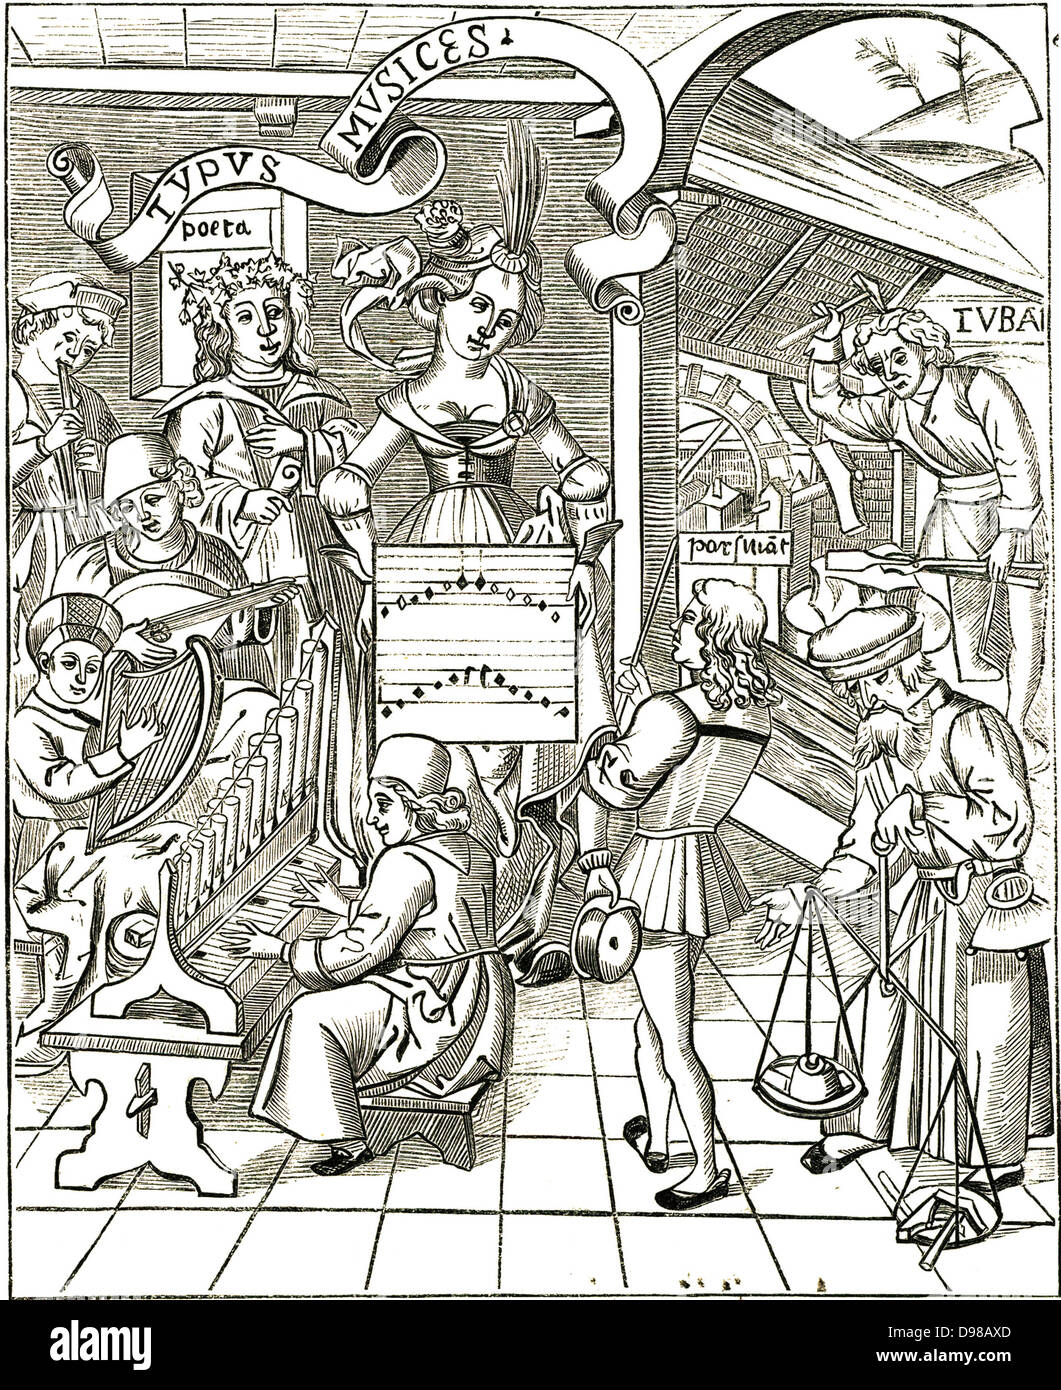 The Personification of Music from Gregor Reisch 'Margarita Philosophica', Strassbourg, 1508. In left foreground man plays a portable organ, above him is a man playing a clarsach or Celtic harp, above him a lute like instrument is being played. Top left a boy plays the pipe. Stock Photo